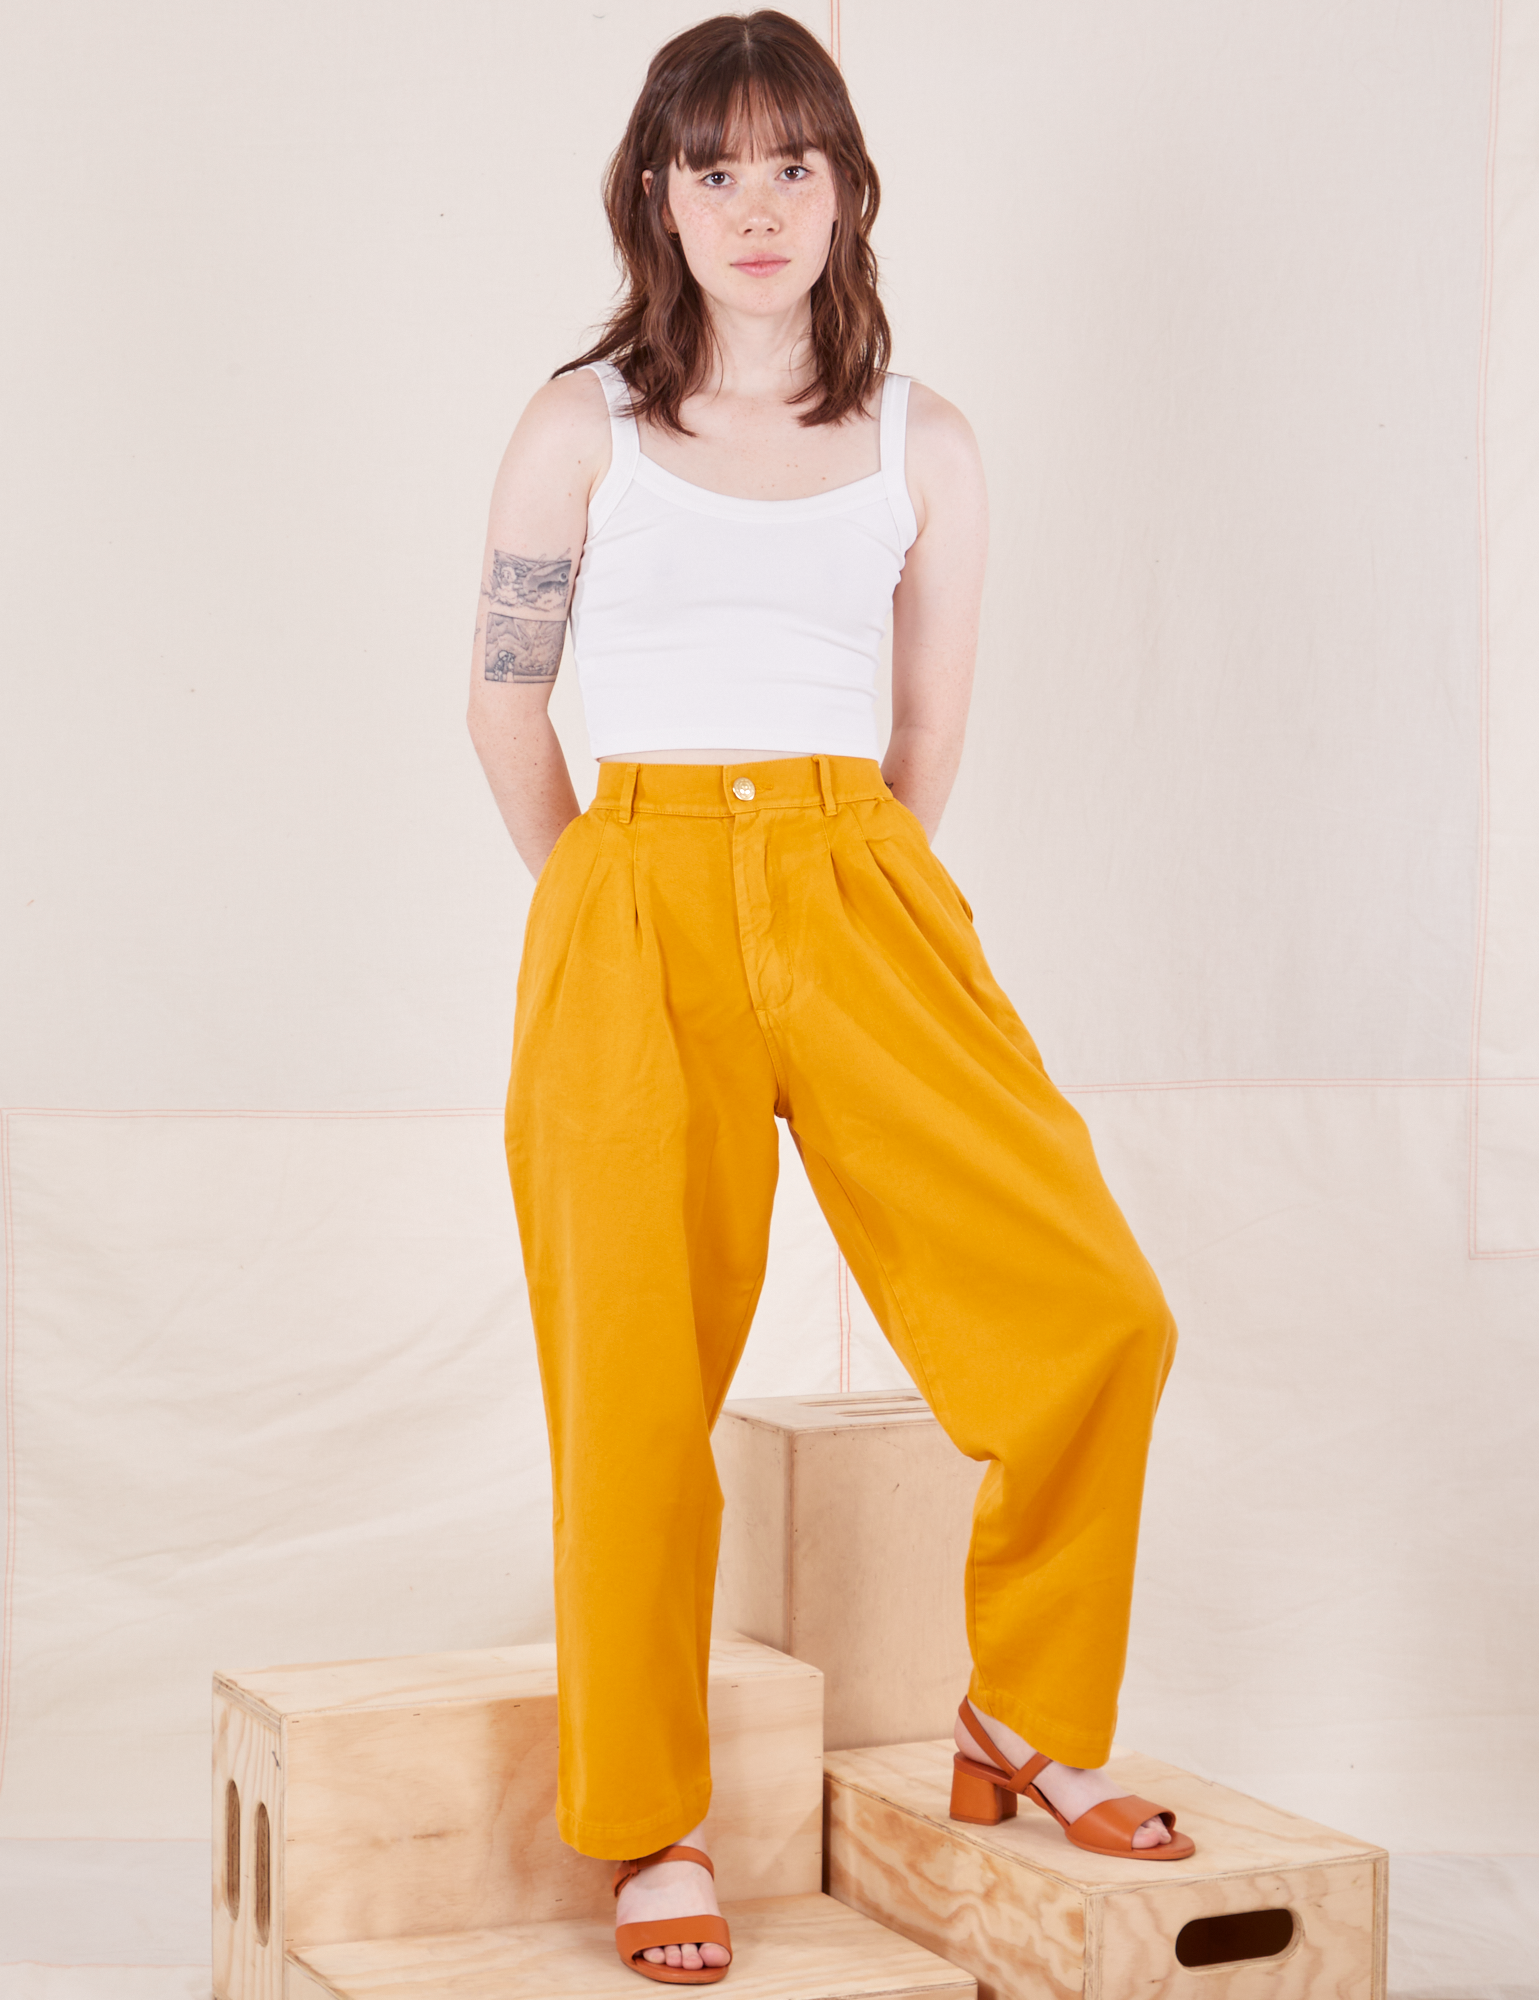 Hana is 5&#39;3&quot; and wearing XXS Petite Organic Trousers in Mustard Yellow paired with vintage off-white Cami